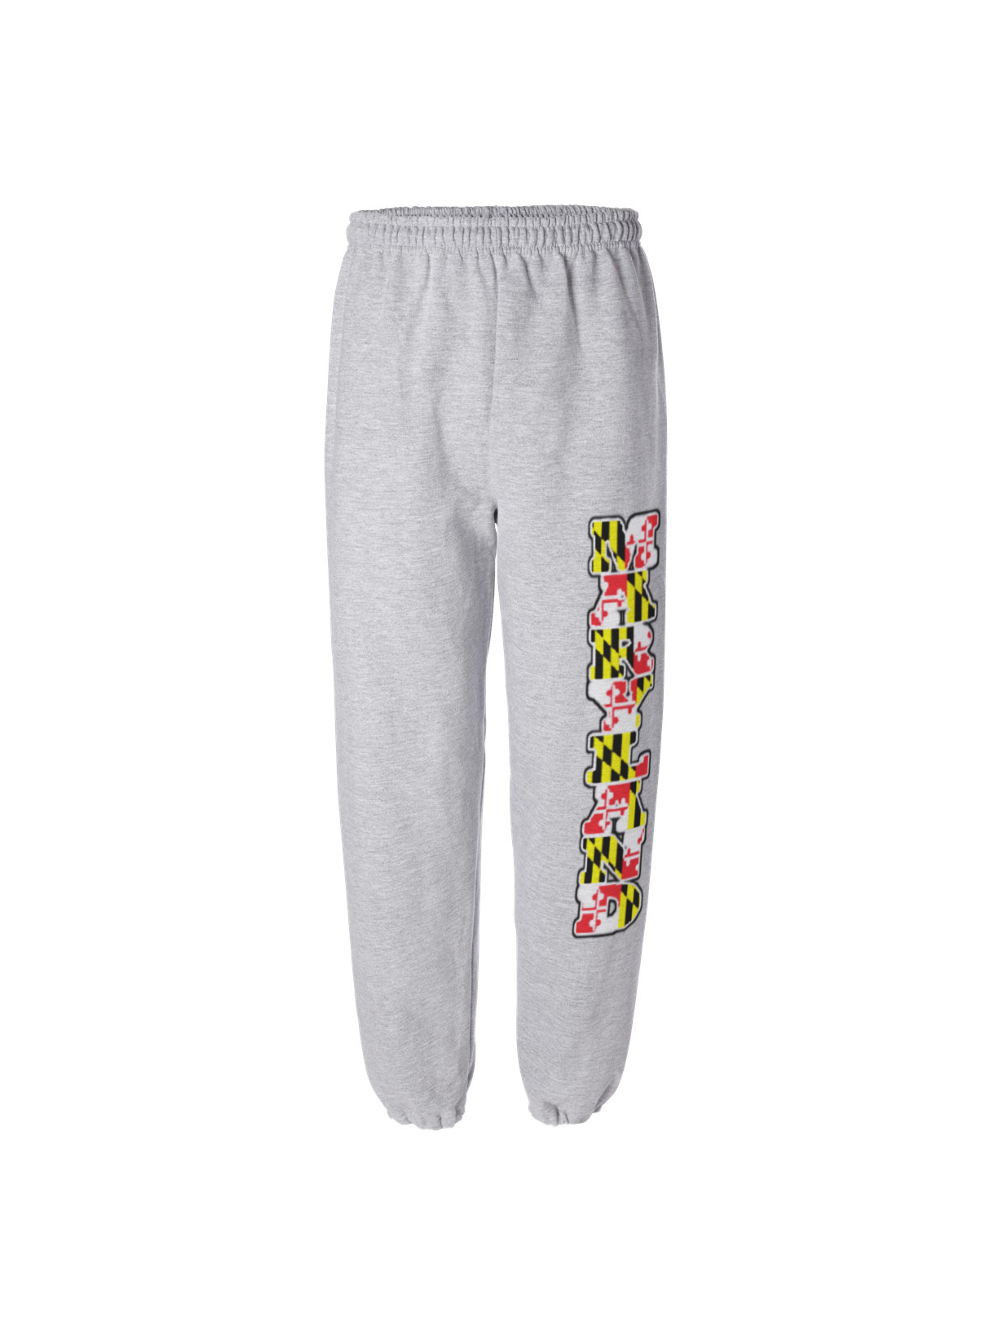 maryland-inscribed-youth-sweatpants